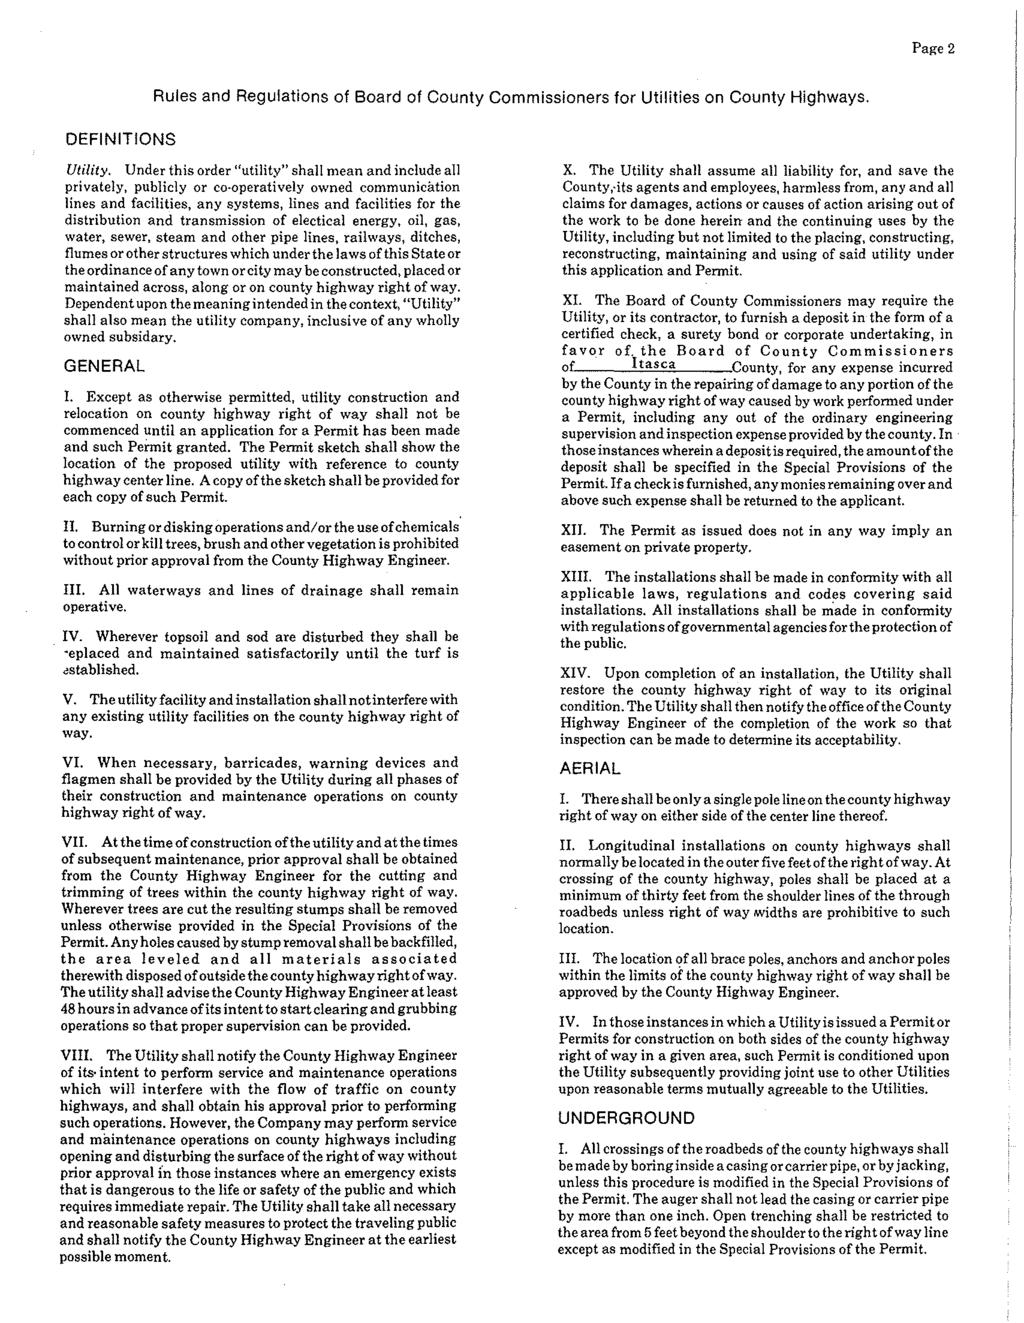 Page 2 DEFINITIONS Rules and Regulations of Board of County Commissioners for Utilities on County Highways. Utility.